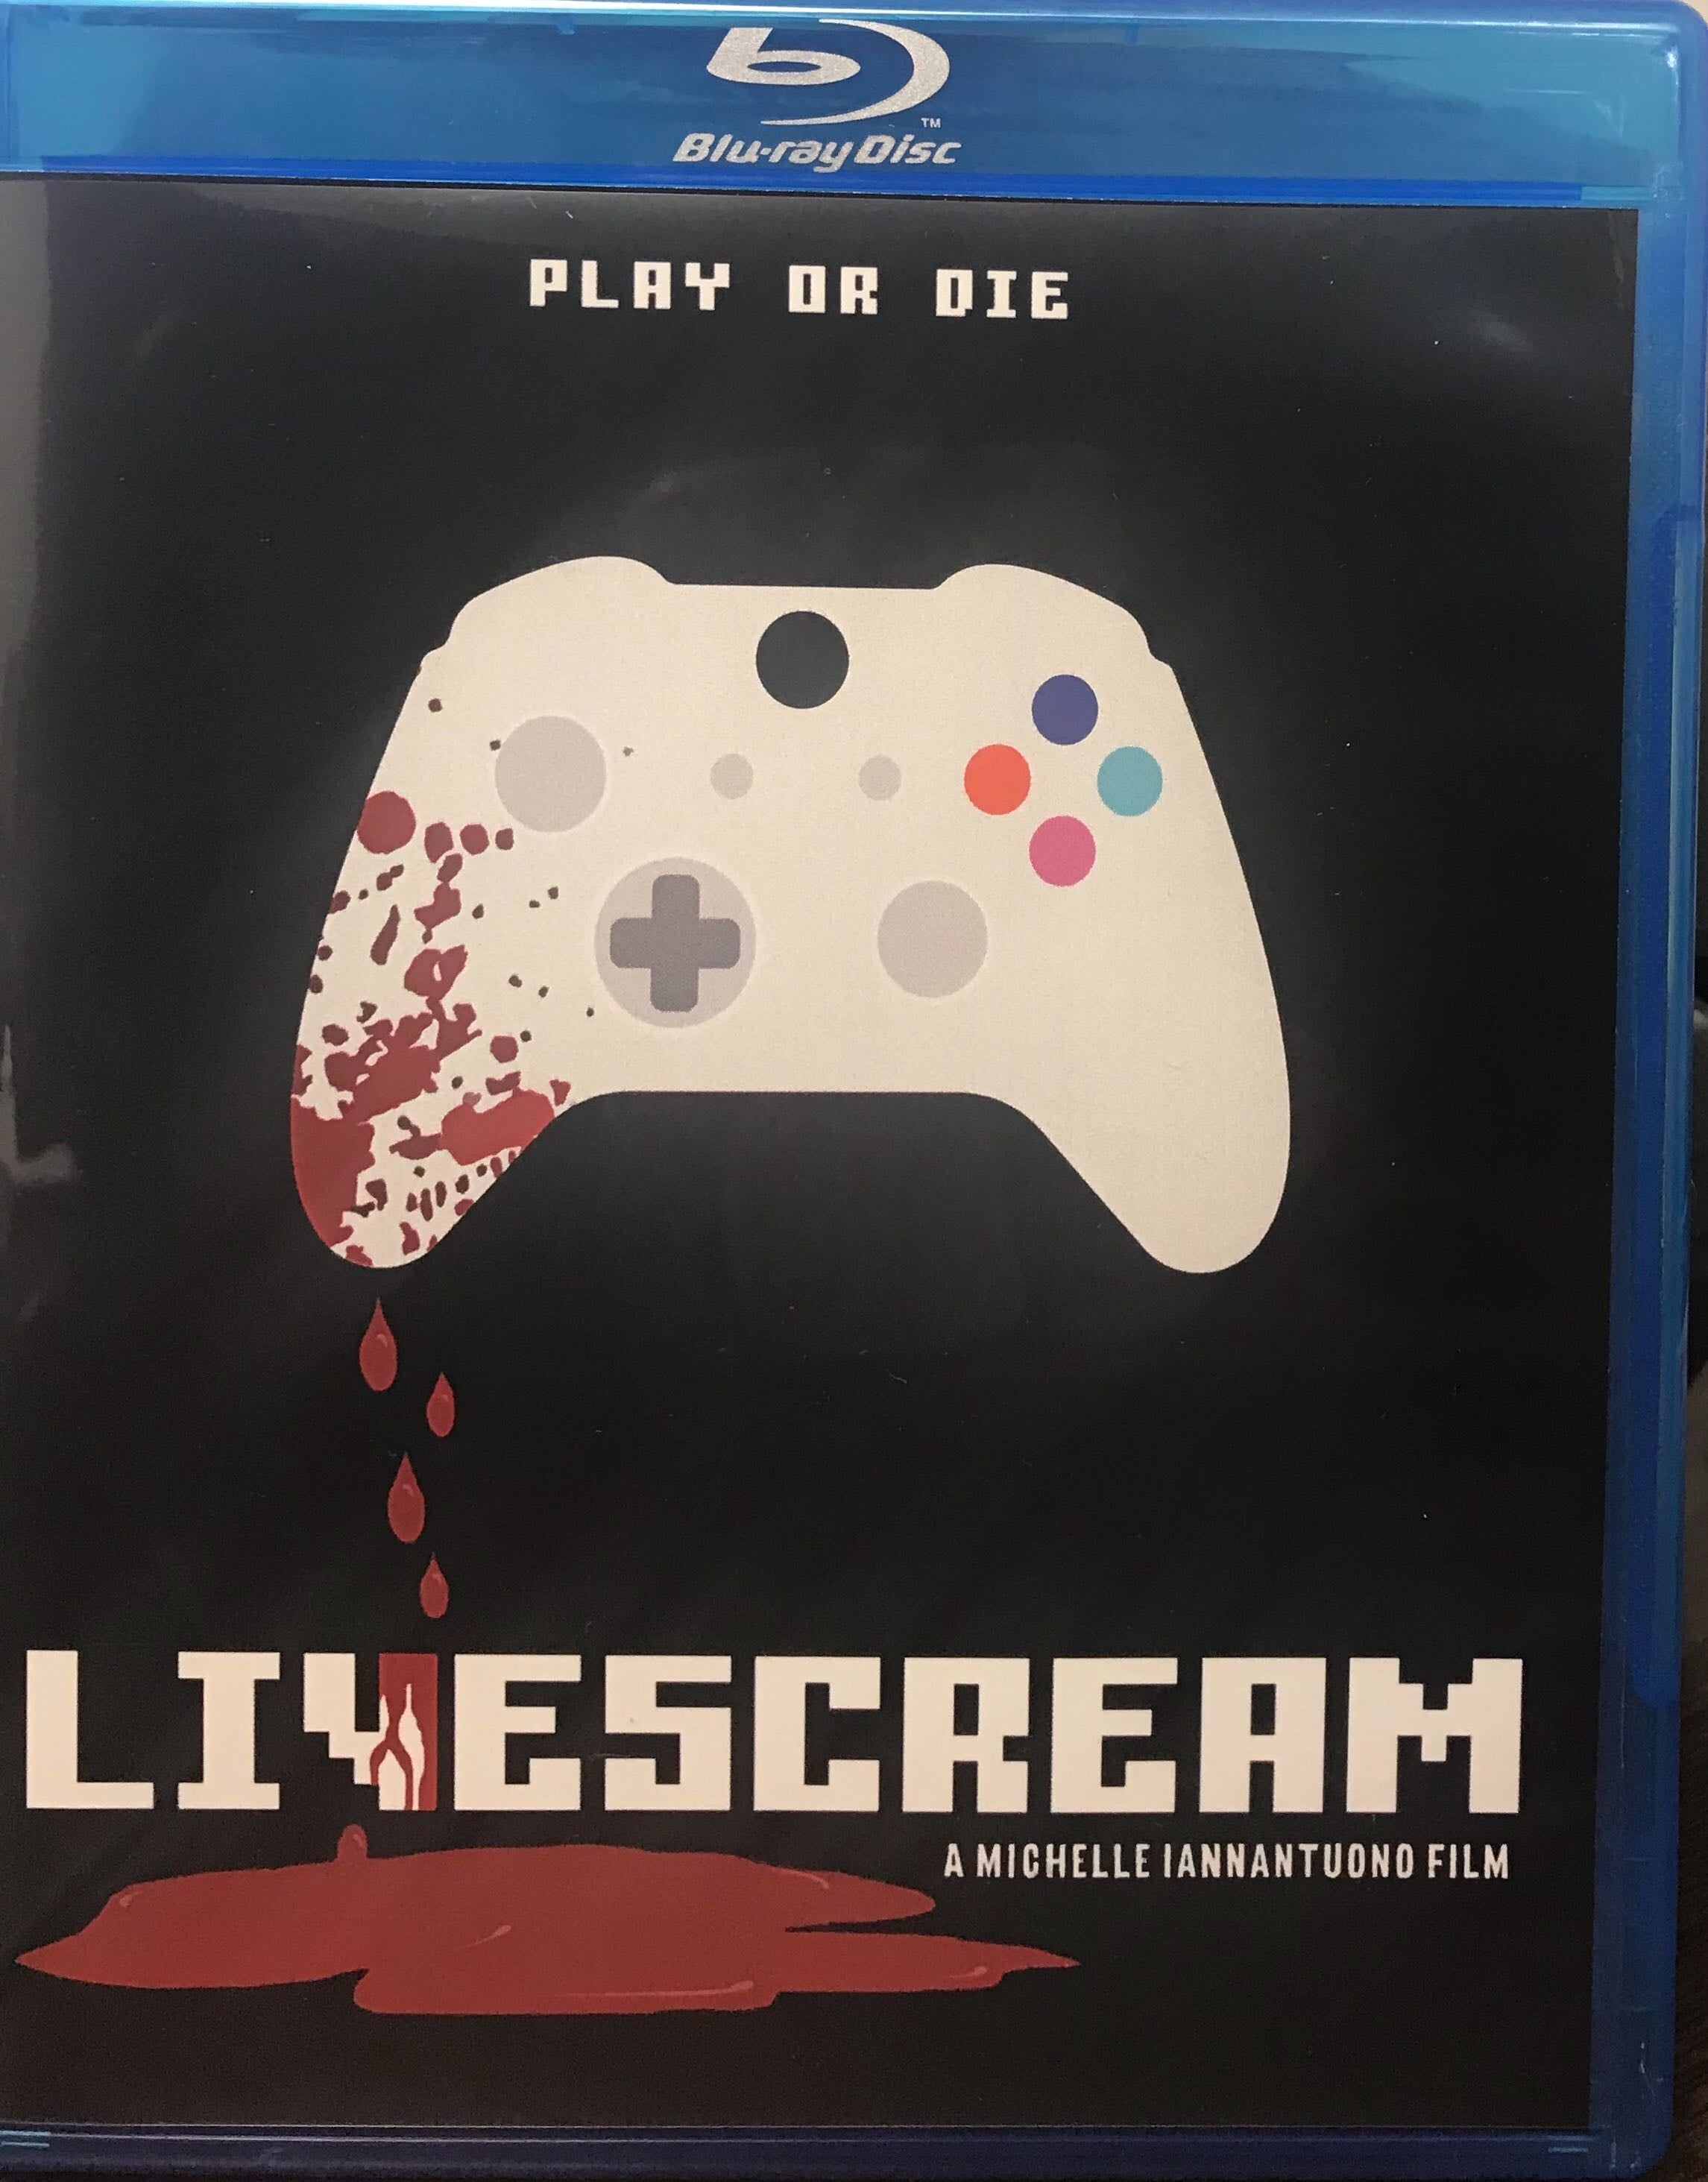 Livescream Blu-ray Retail Cover (Not Limited Edition)